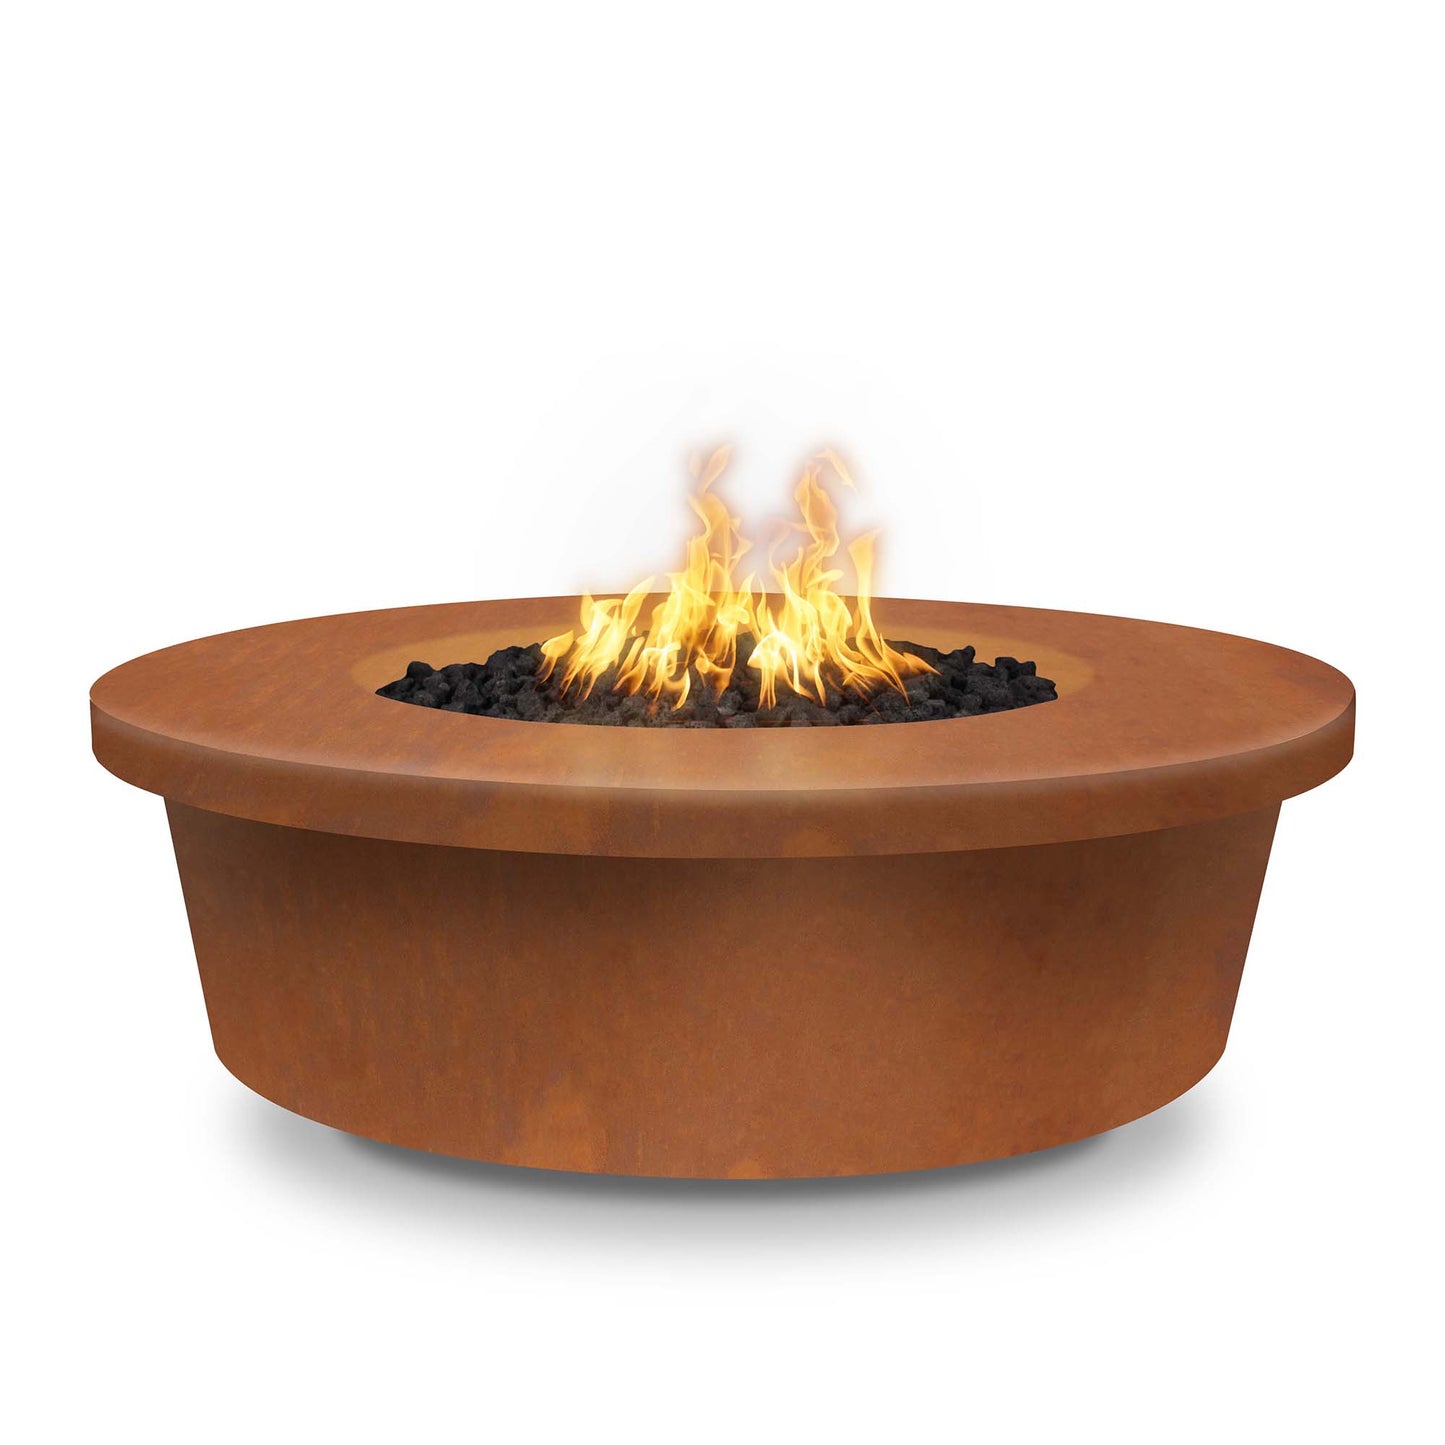 The Outdoor Plus Round Tempe 48" Stainless Steel Liquid Propane Fire Pit with Flame Sense with Spark Ignition